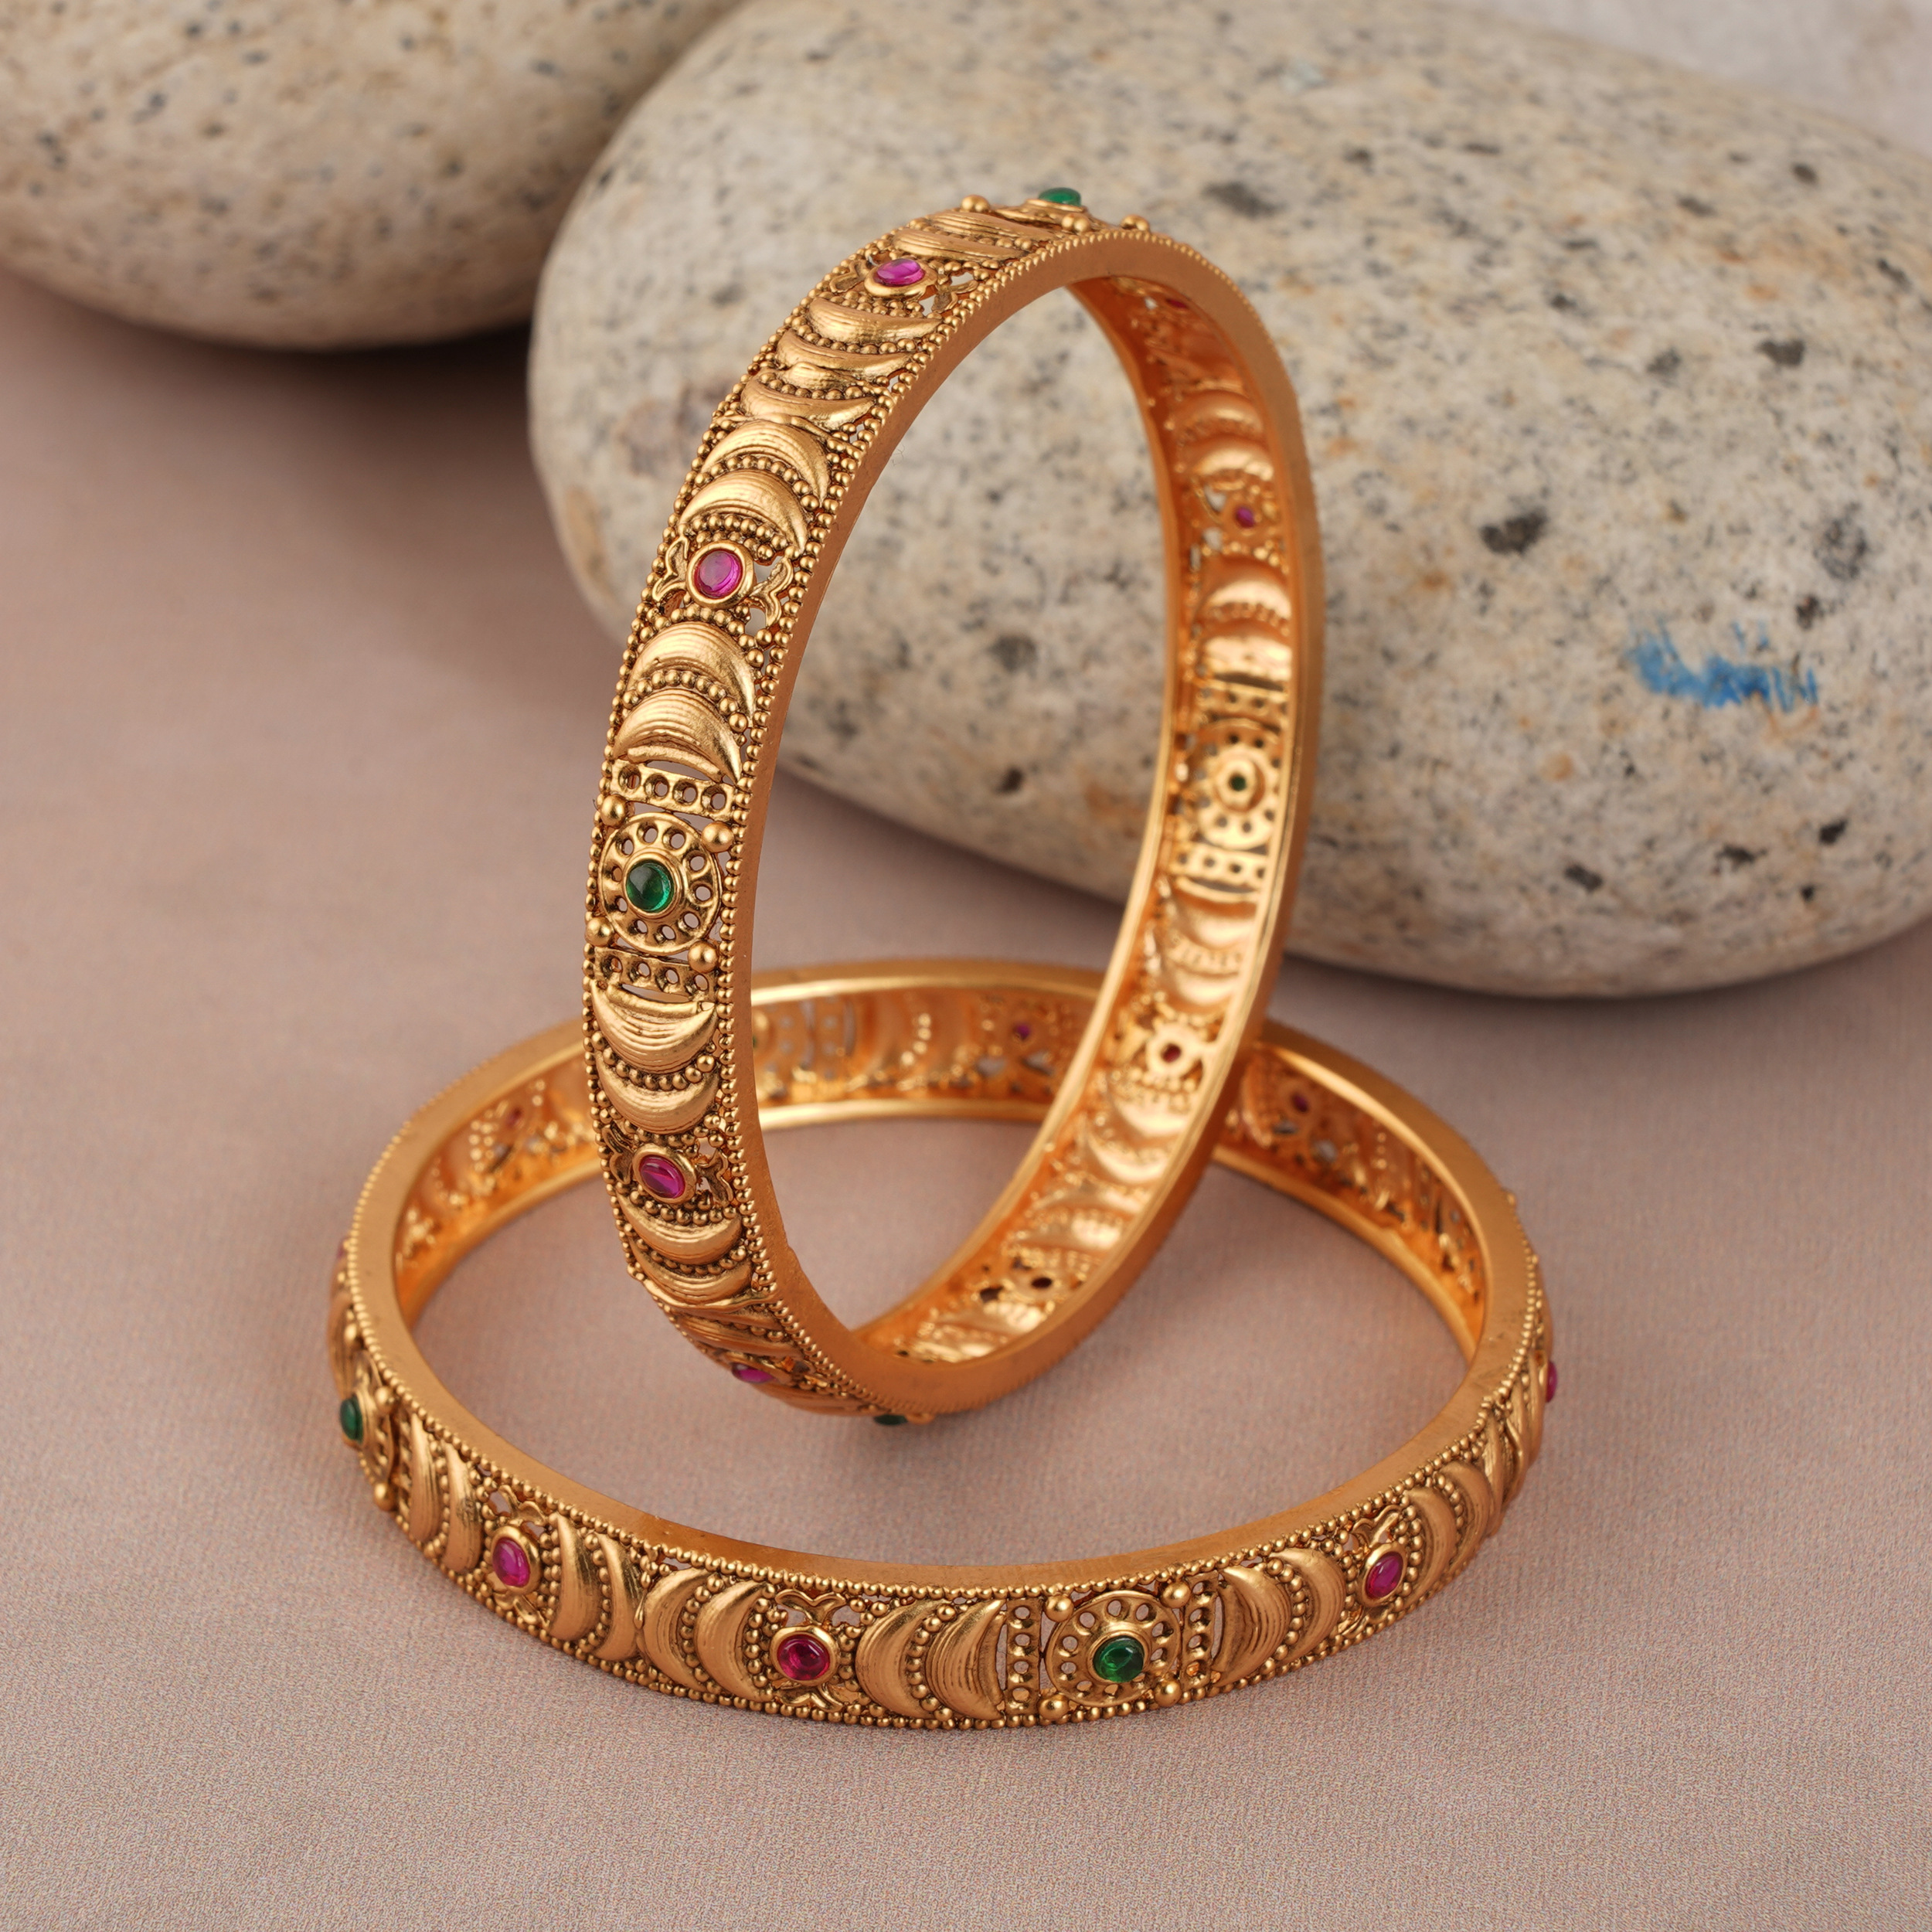 gold bangles design for party wear